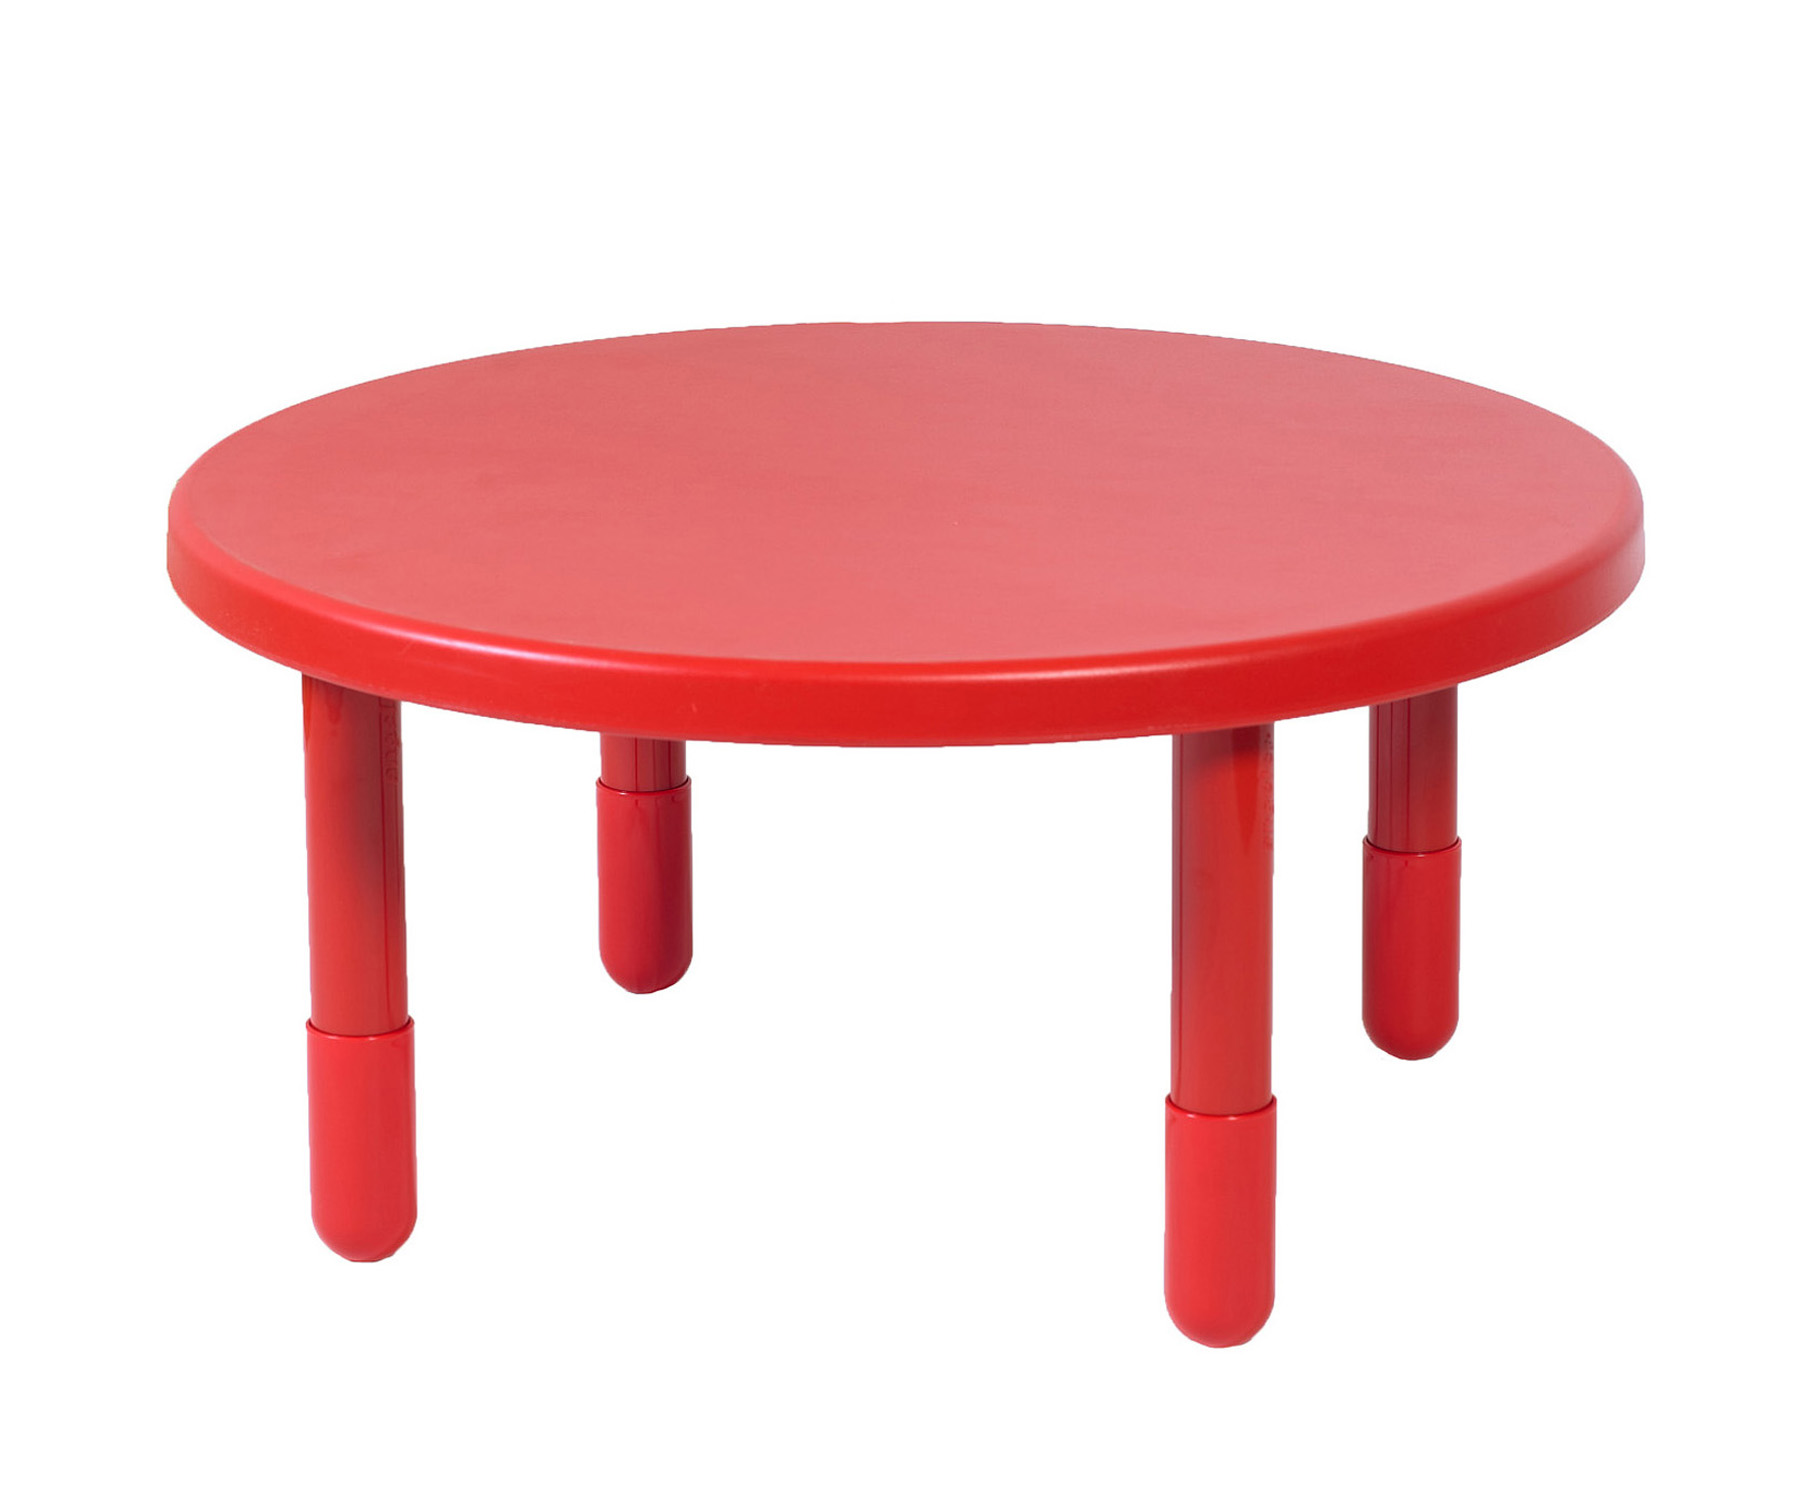 Value 91,5 cm  Diameter Round Table - Candy Apple Red with 45,5 cm  Legs